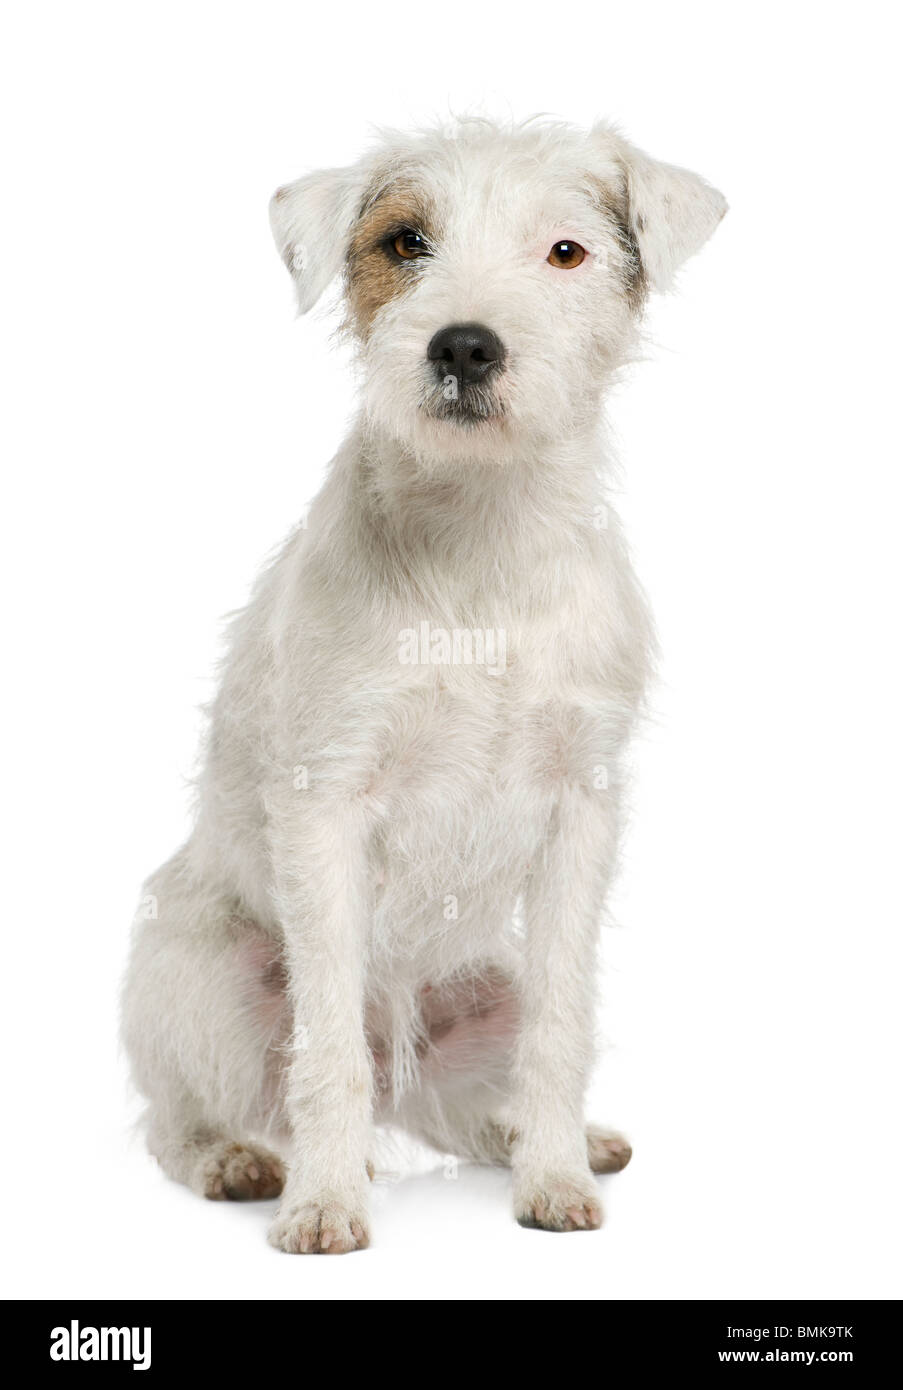 Parson Russell Terrier sitting in front of white background Stock Photo